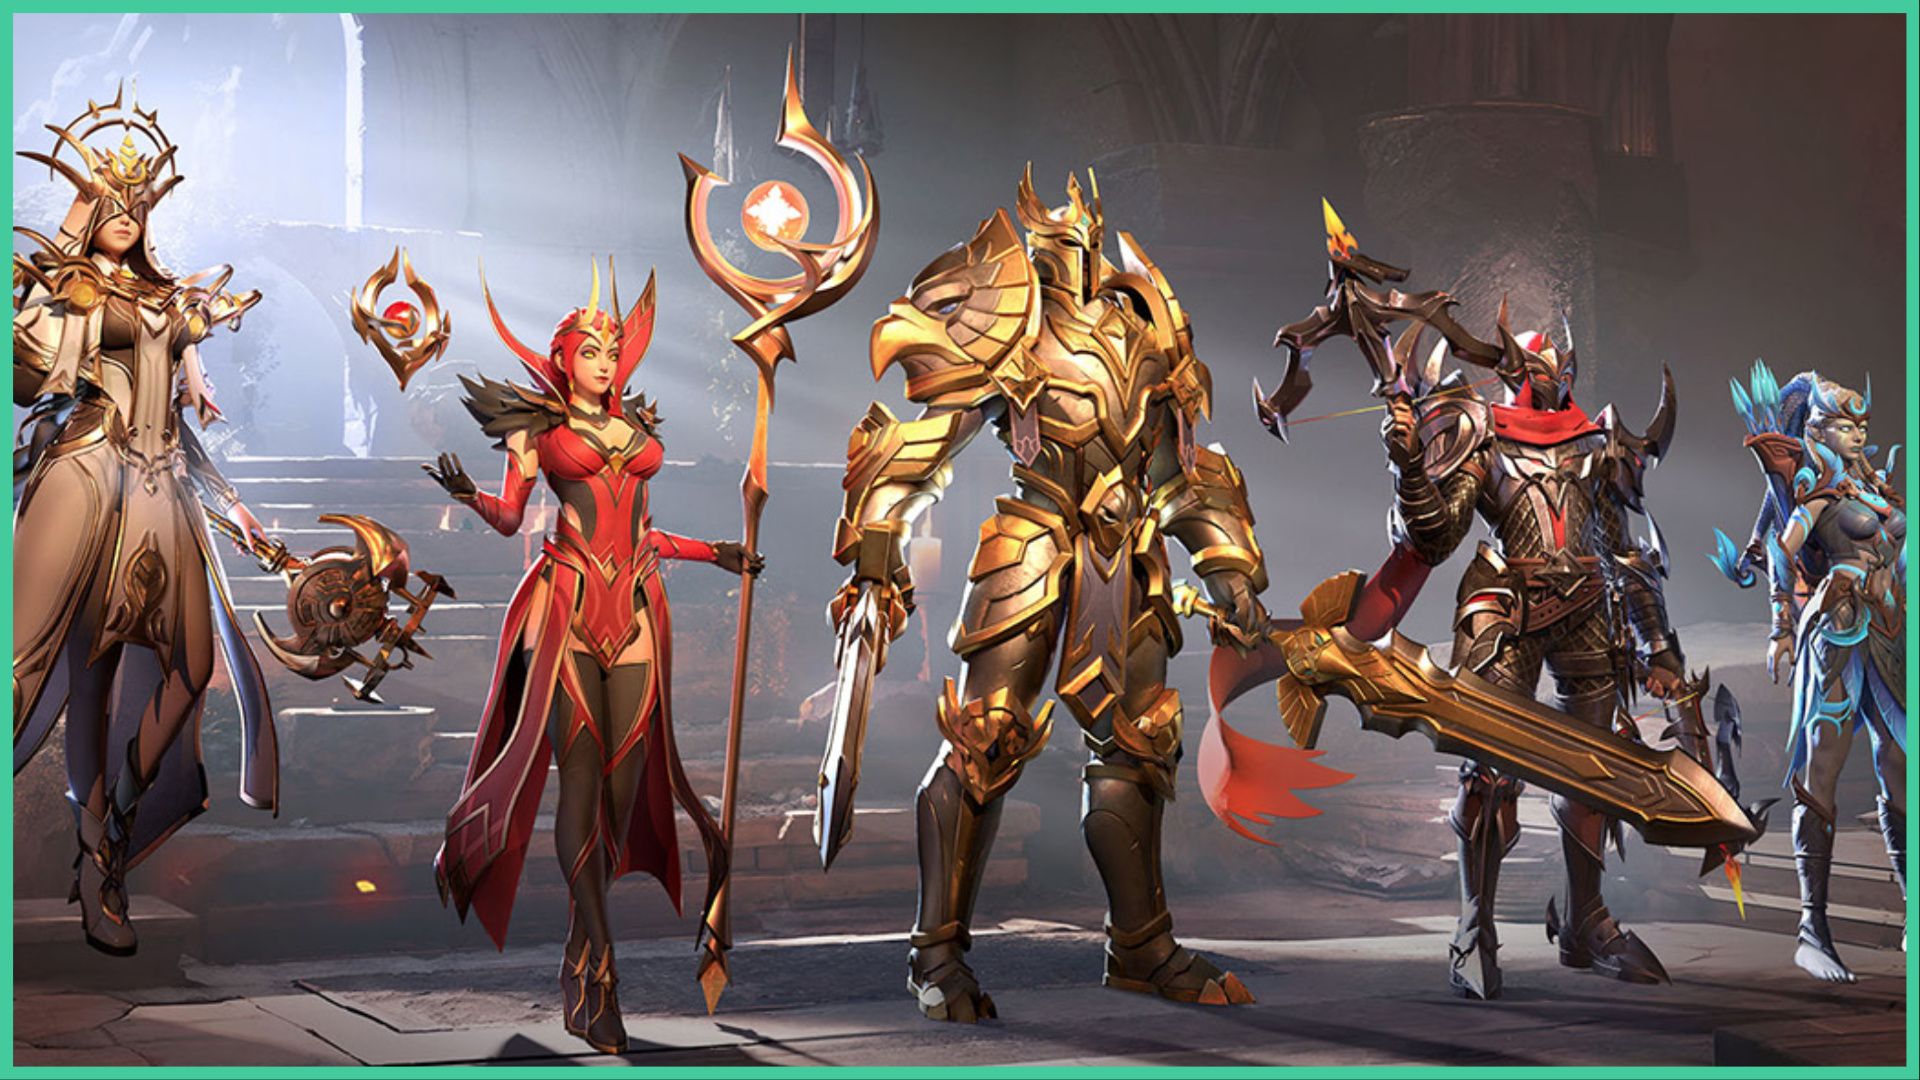 feature image for our dungeon hunter 6 tier list, the image features promo art for the game of a class selection screen, from the left is the boon sister as she floats in the air holding her staff, then the mage holding her staff with a floating arcane orb in the other hand, then there is the warrior holding his sword while wearing golden armor, the assassin is to the right of him holding his crossbow, with the archer to the right as she looks ahead